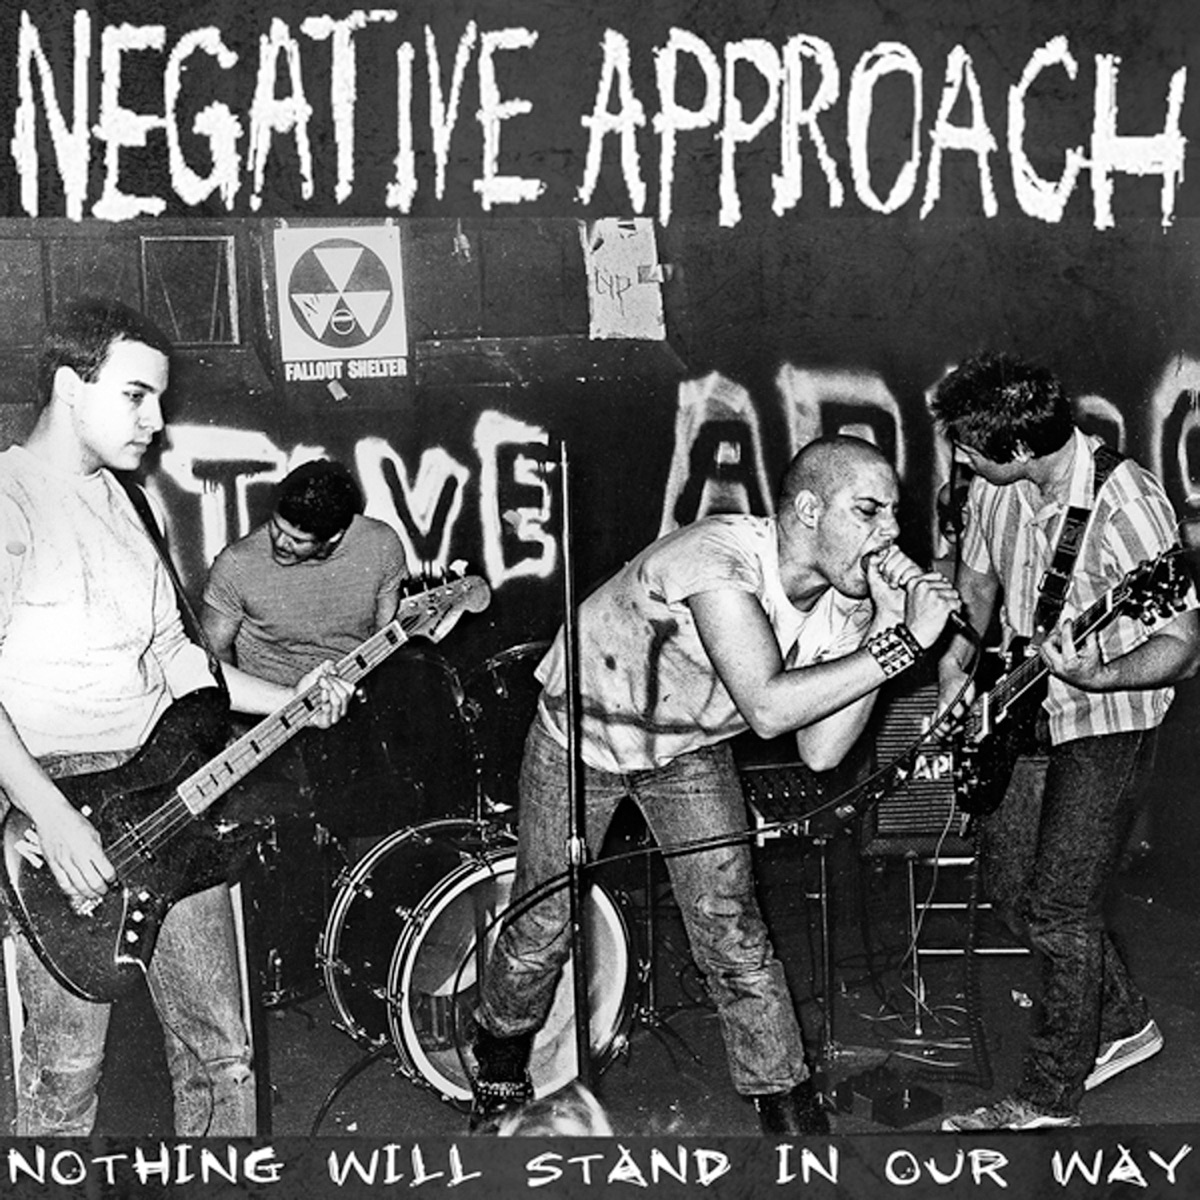 Negative Approach - Nothing Will Stand In Our Way